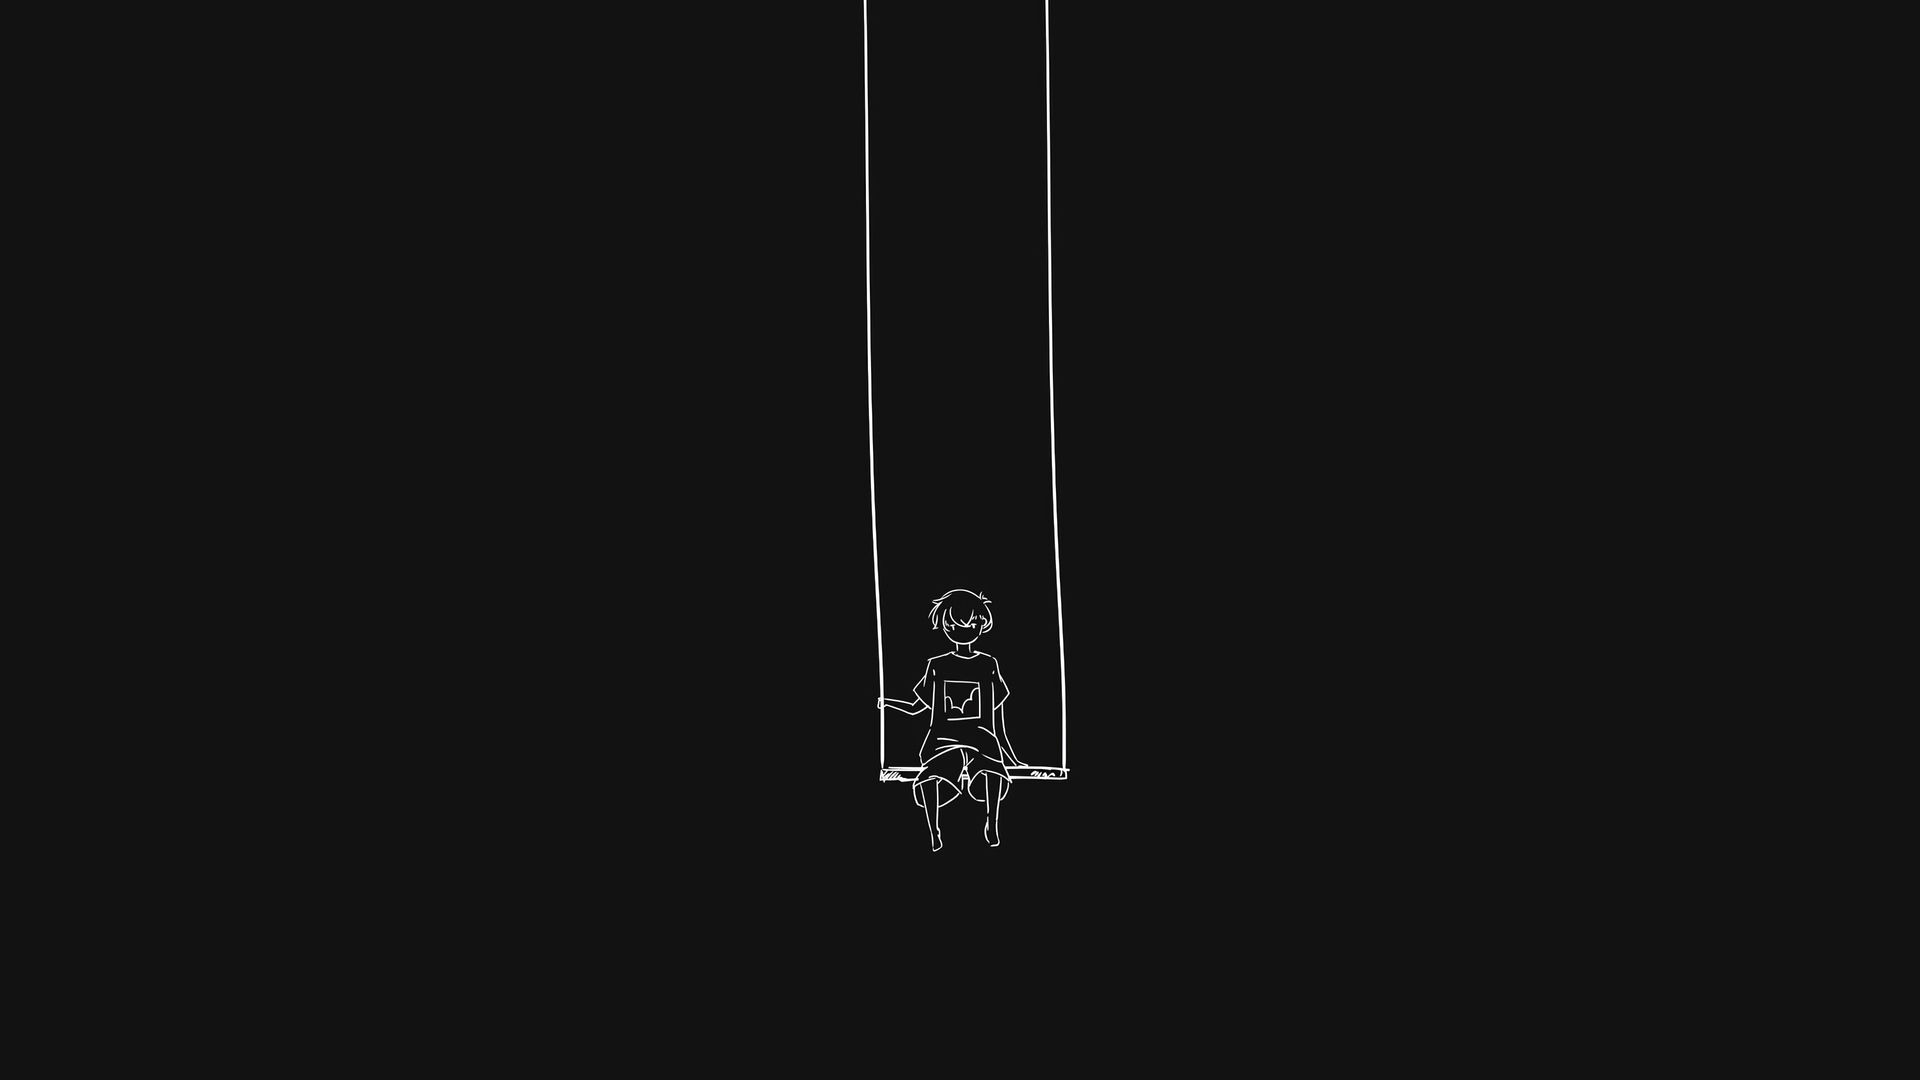 A black and white image of a boy sitting on a swing. - Dark